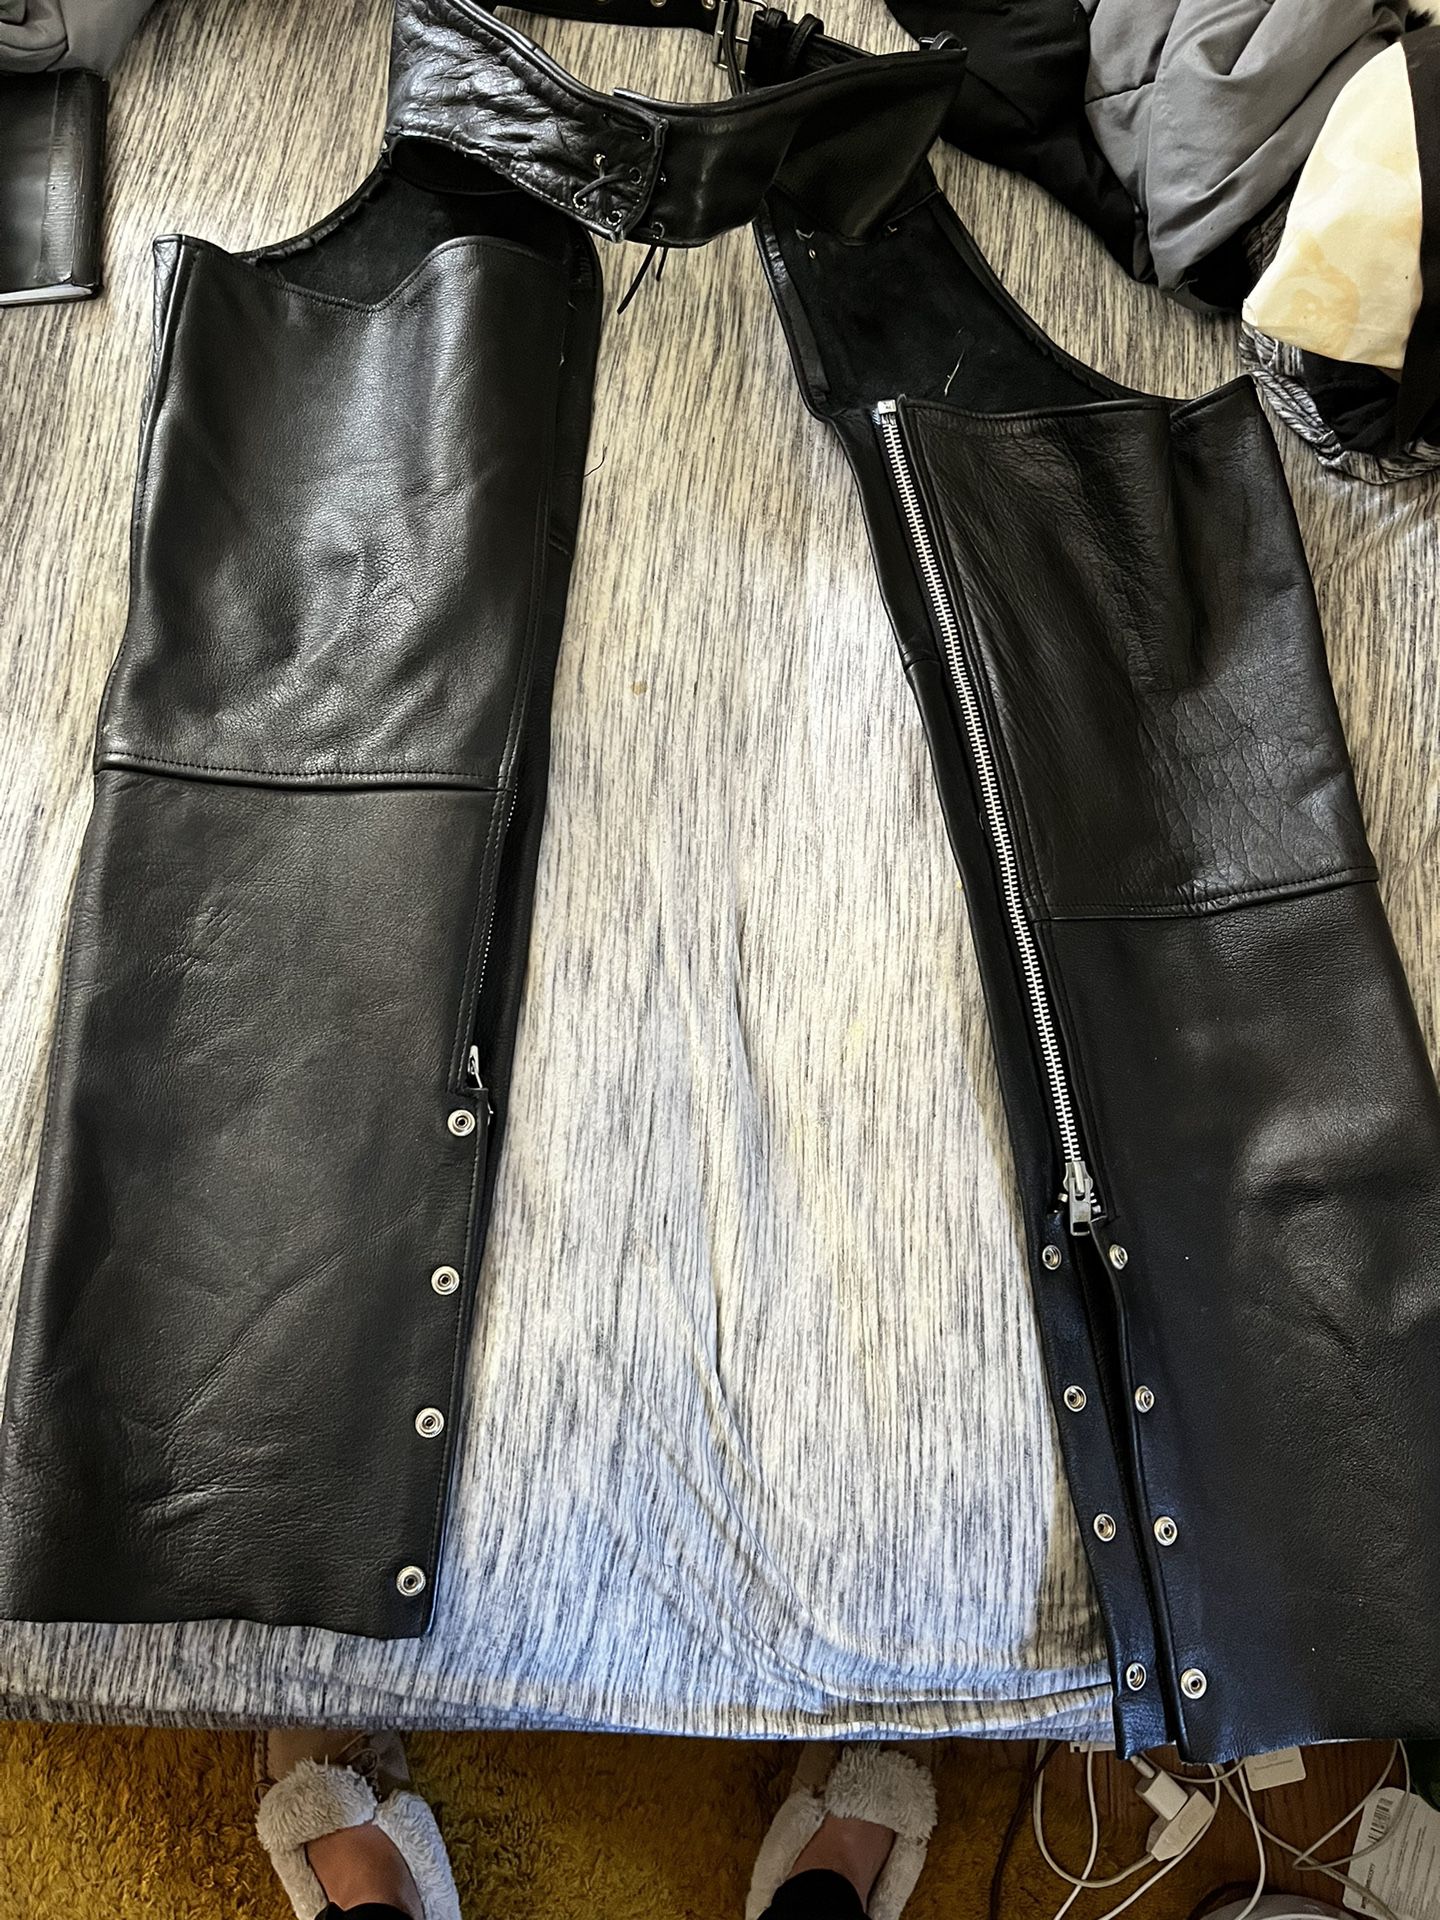 Men’s Leather Chaos